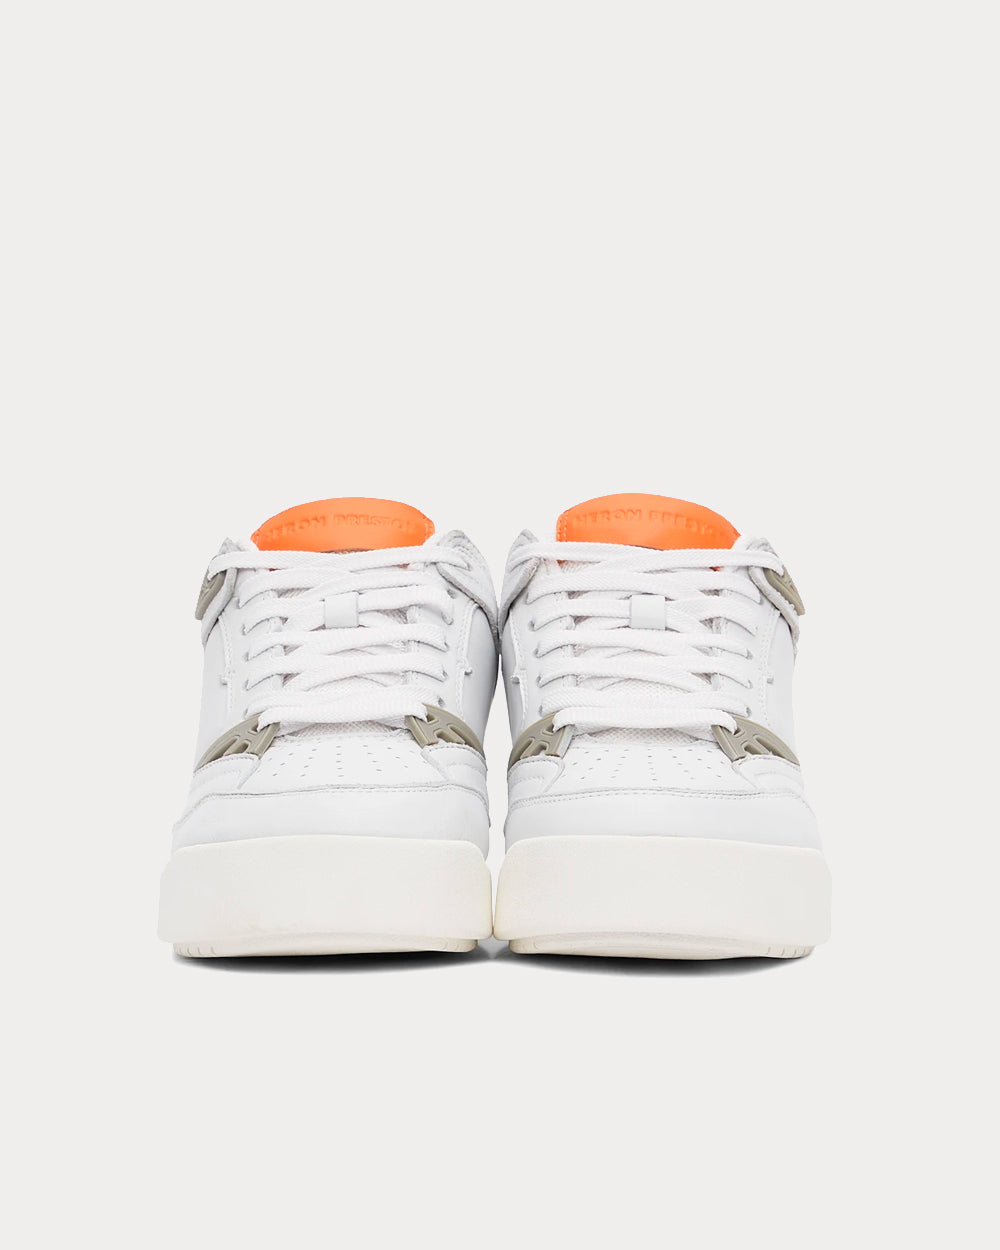 Heron Preston - Panelled Buffed Leather White / Cream Low Top Sneakers